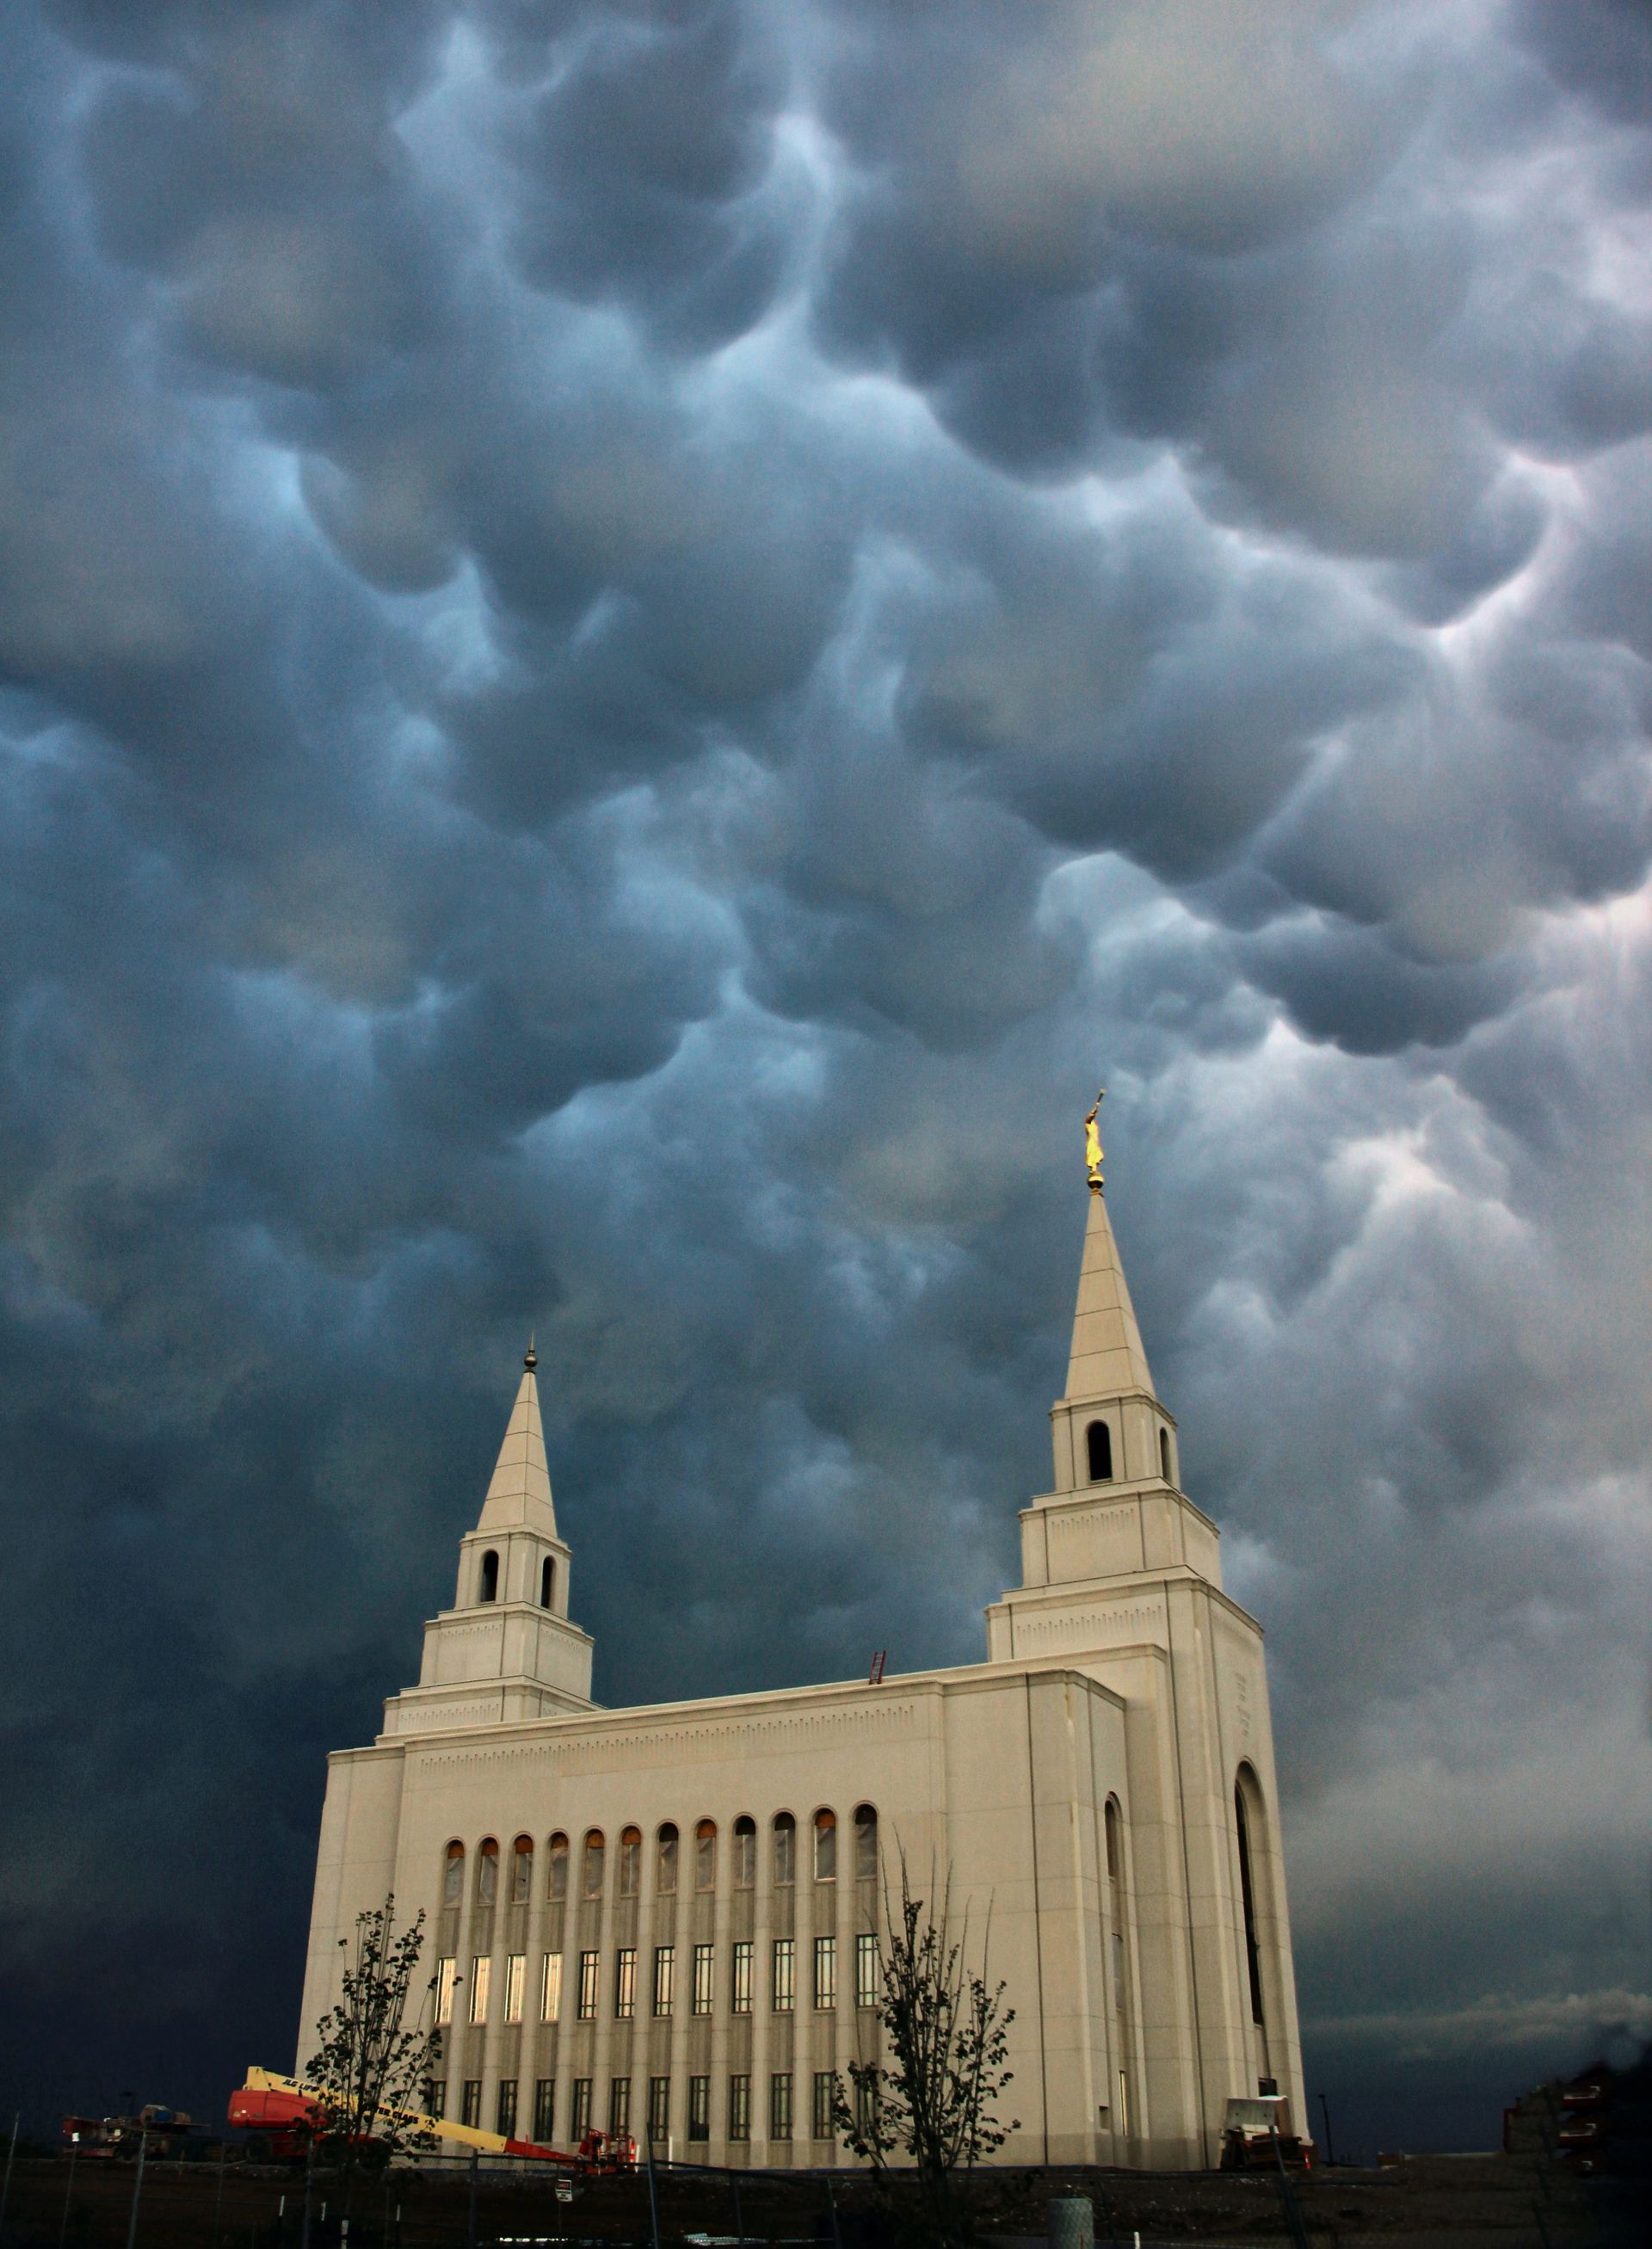 A portrait view of the Kansas City Missouri Temple with clouds overhead.